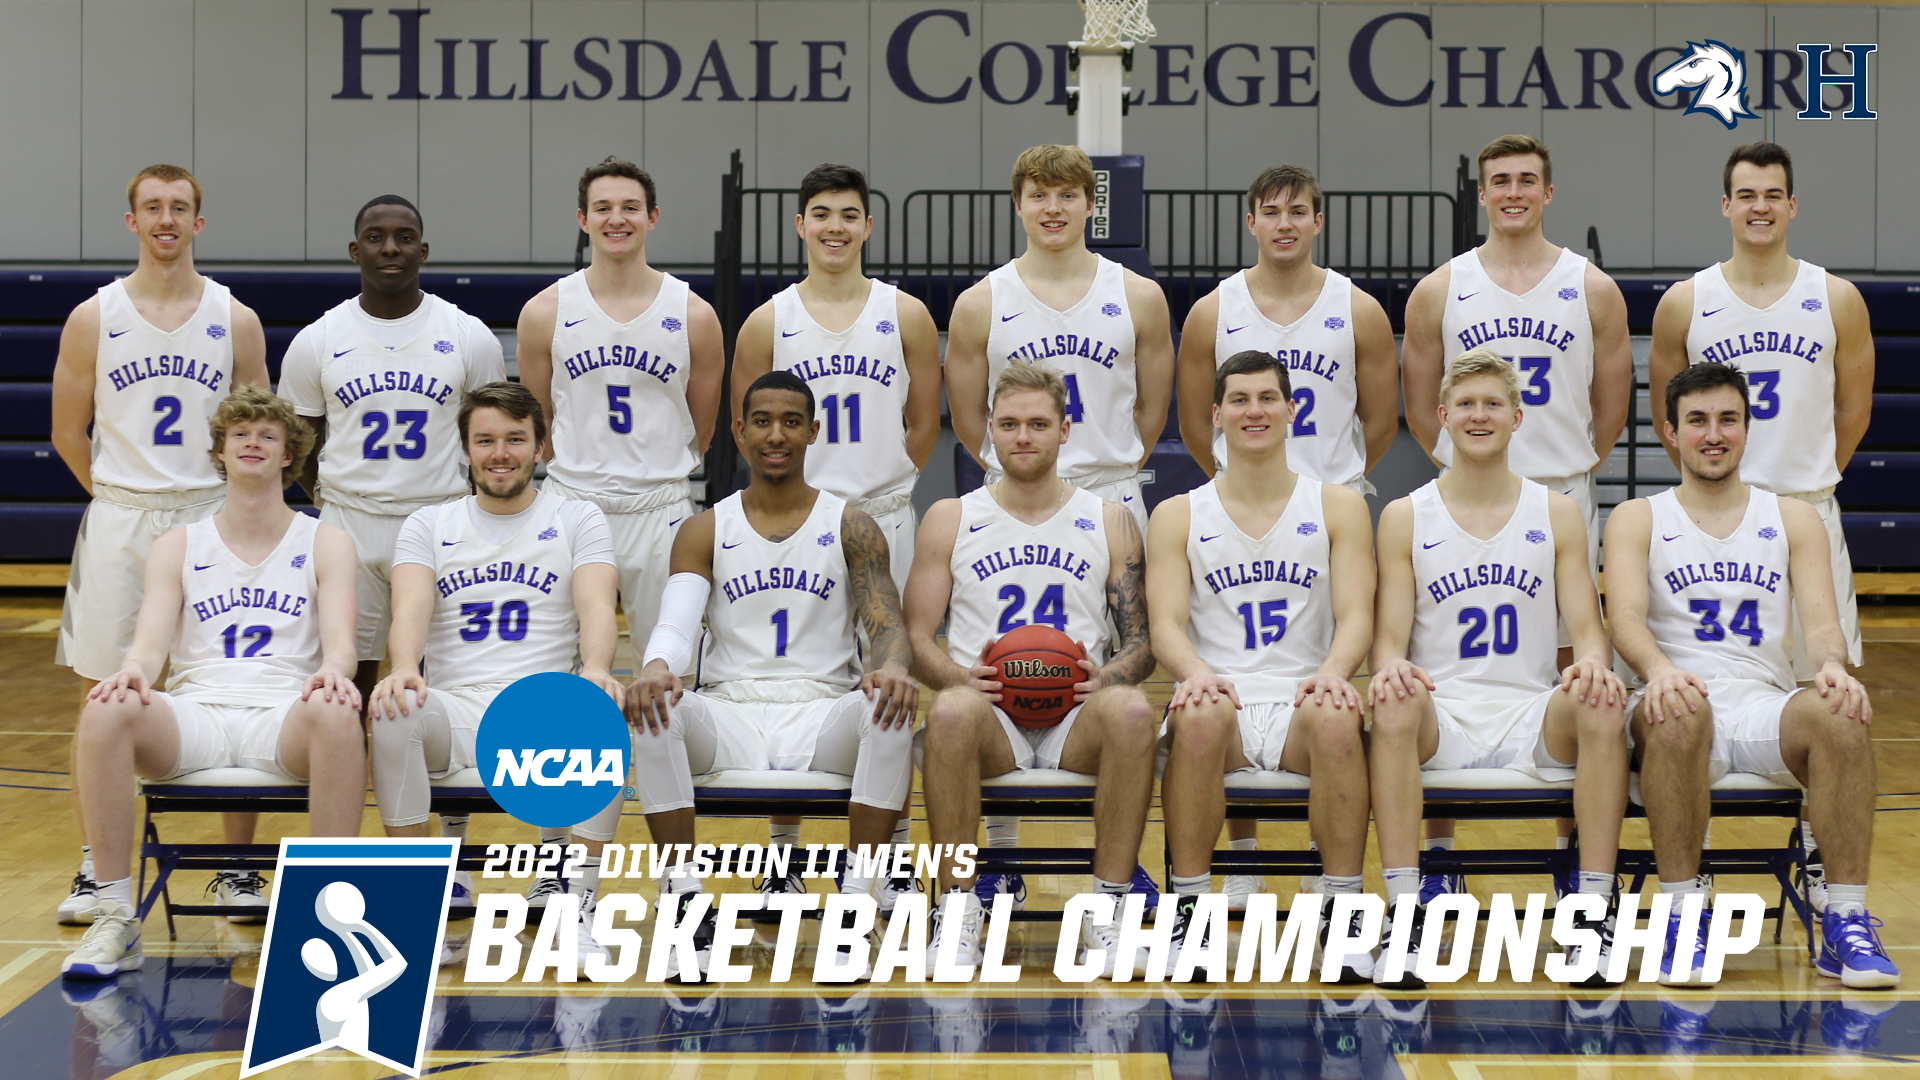 Chargers earn 3-seed in NCAA DII Midwest Regional, rematch with Cedarville